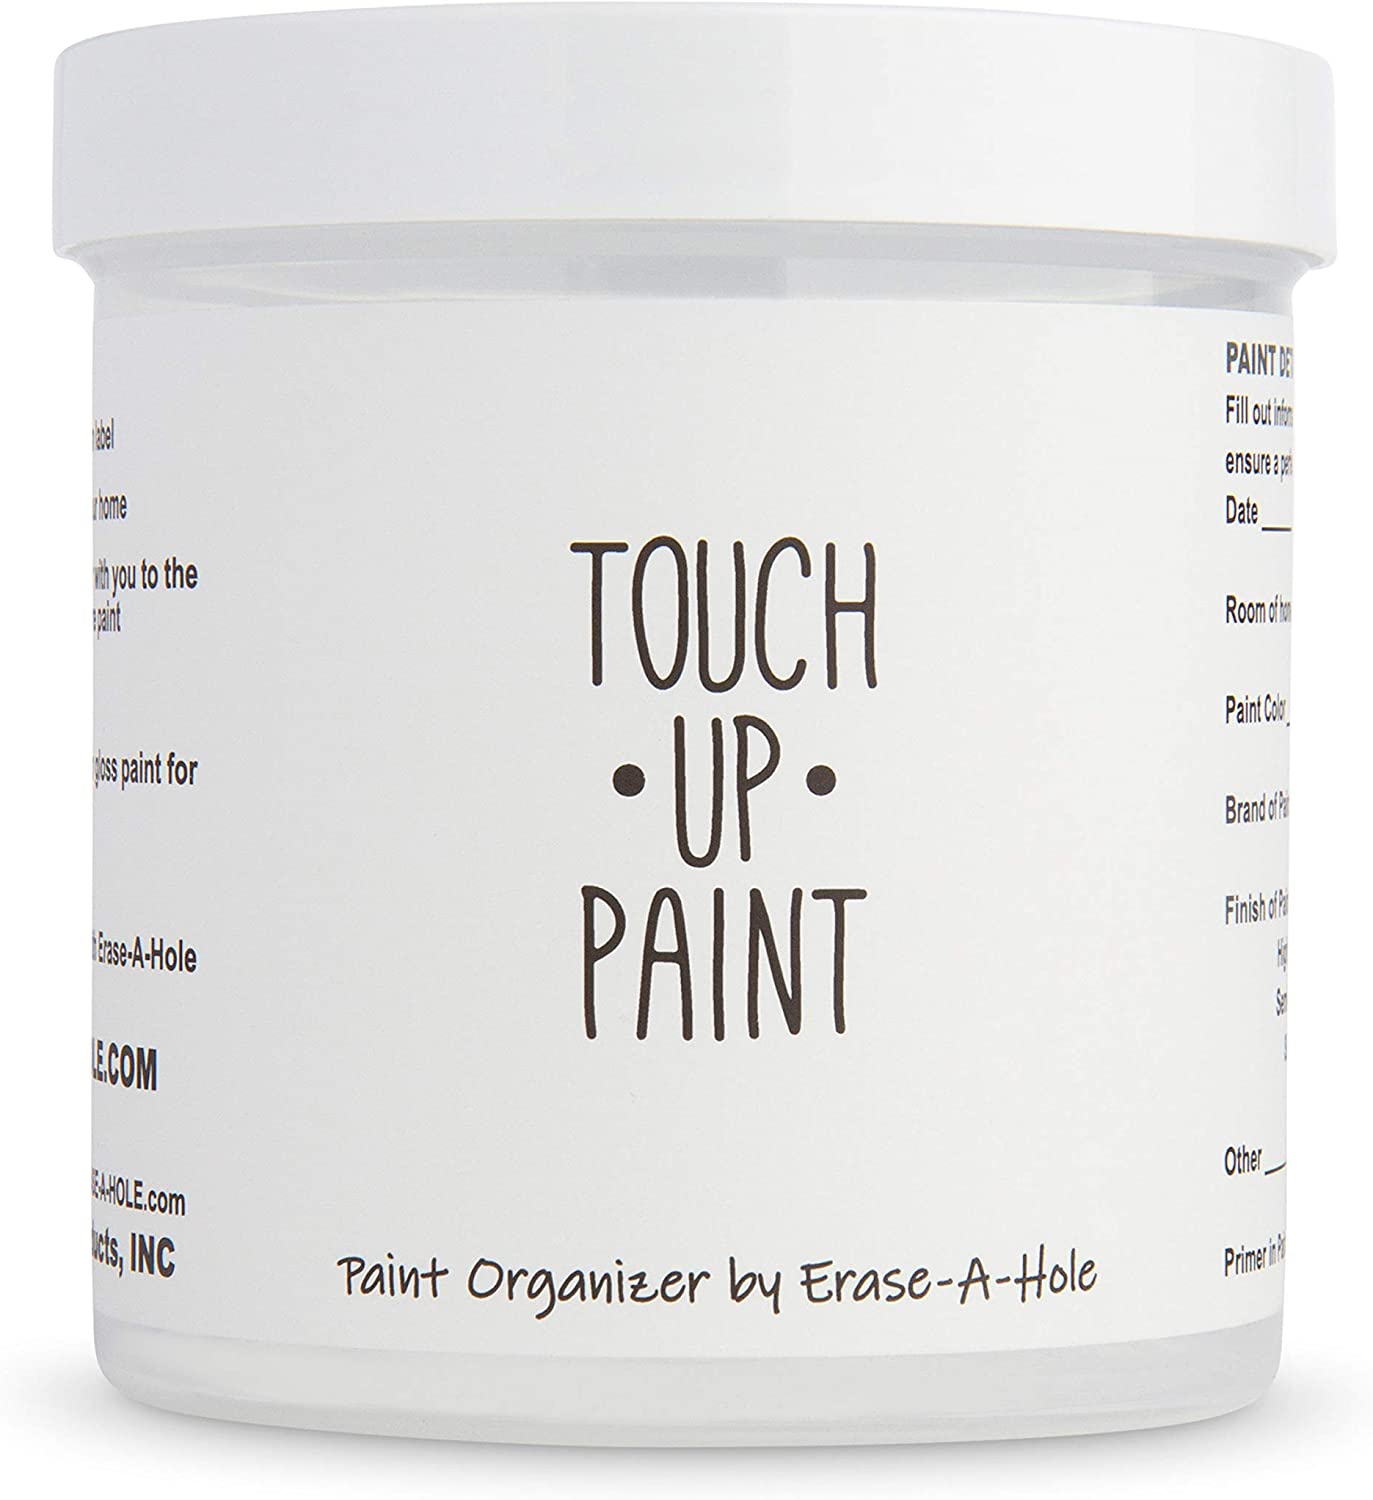 Touch Up Paint Organizer